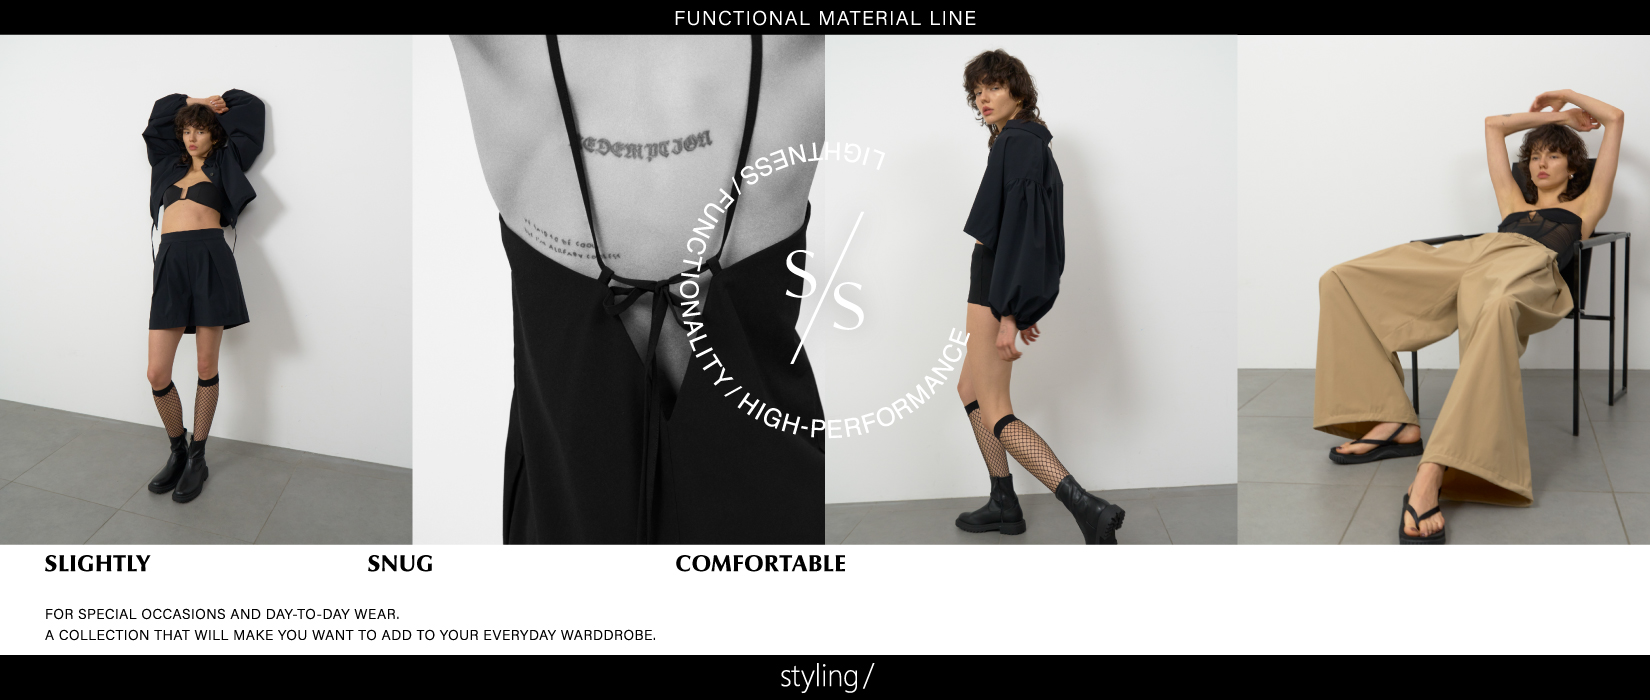 「styling/＜スタイリング＞」POINT10% CAMPAIGN 4/17(wed)-4/19(fri)｜styling/機能素材ライン「S/S」